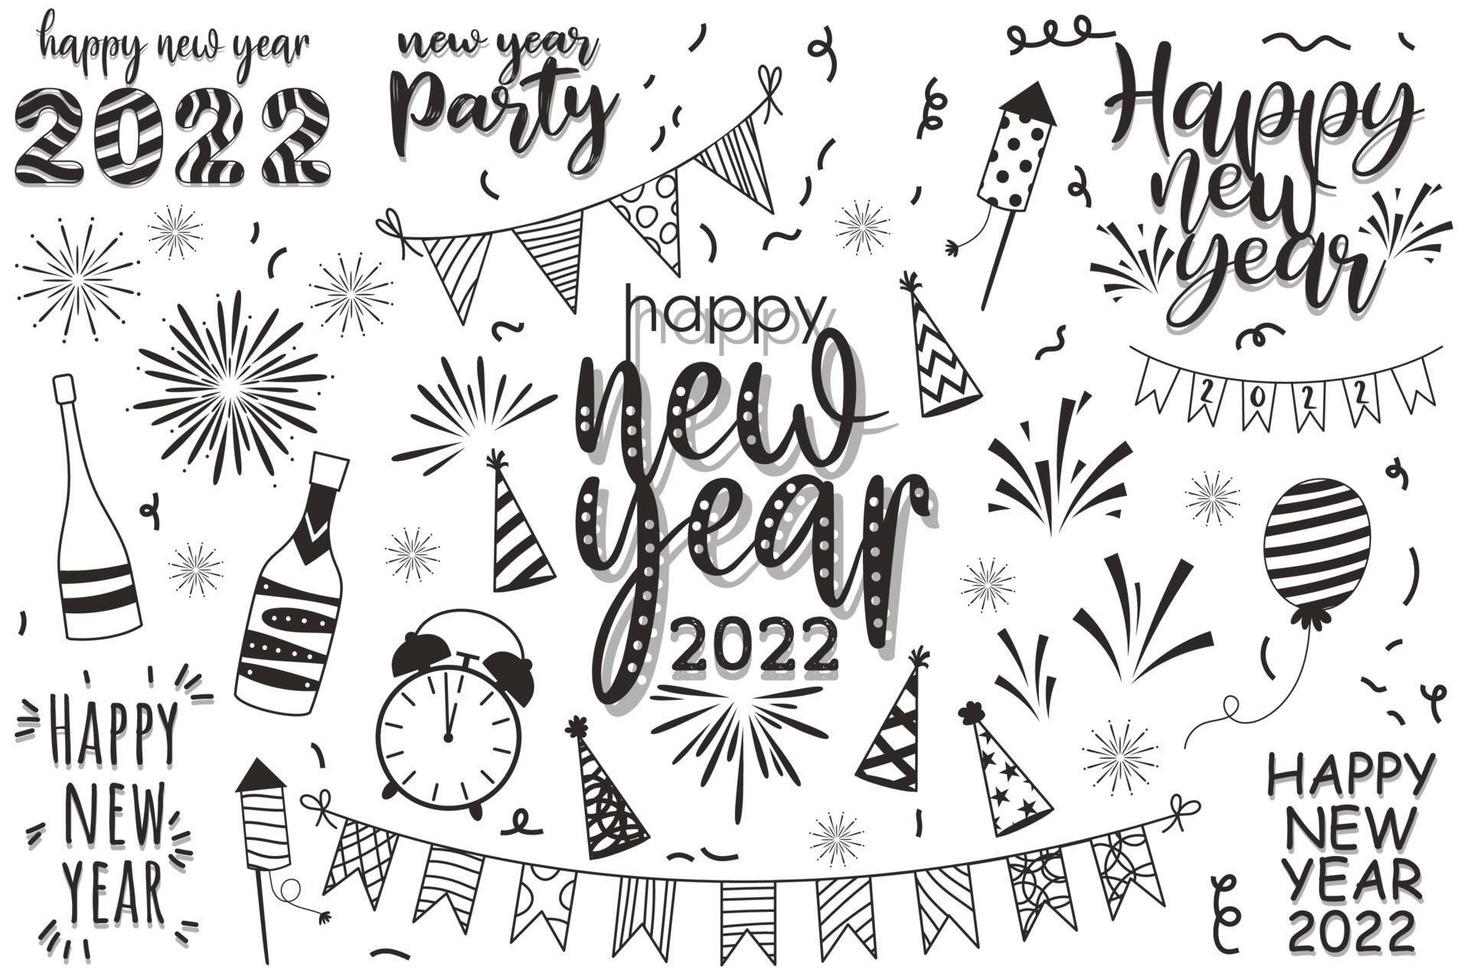 Greeting New year 2022 card cartoon with lettering vector illustration